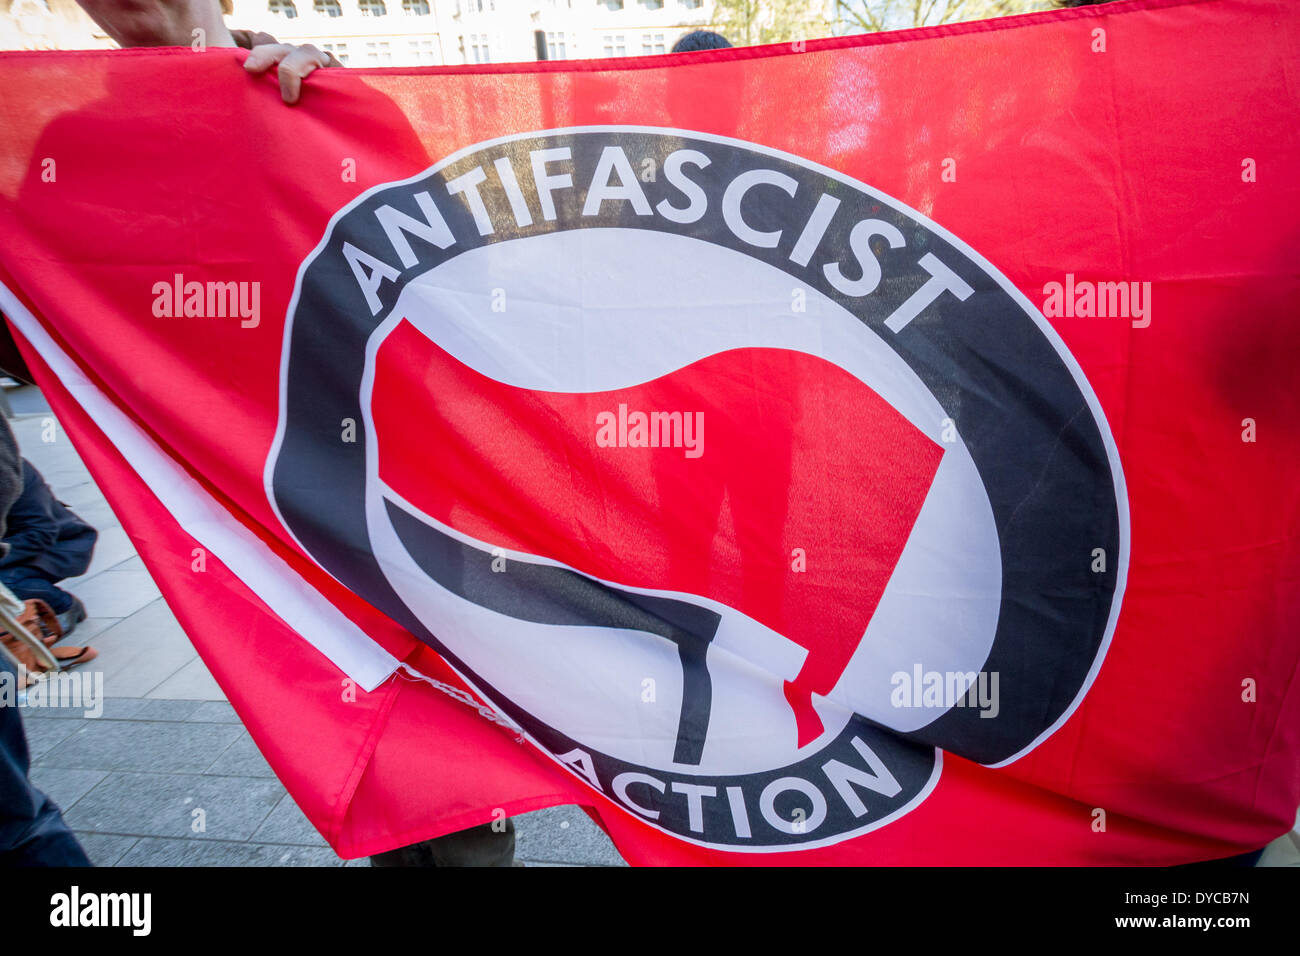 London, UK . 14th Apr, 2014. Justice for the Anti-fascist Five demonstration at Westminster Magistrates Court in London. Credit:  Guy Corbishley/Alamy Live News Stock Photo